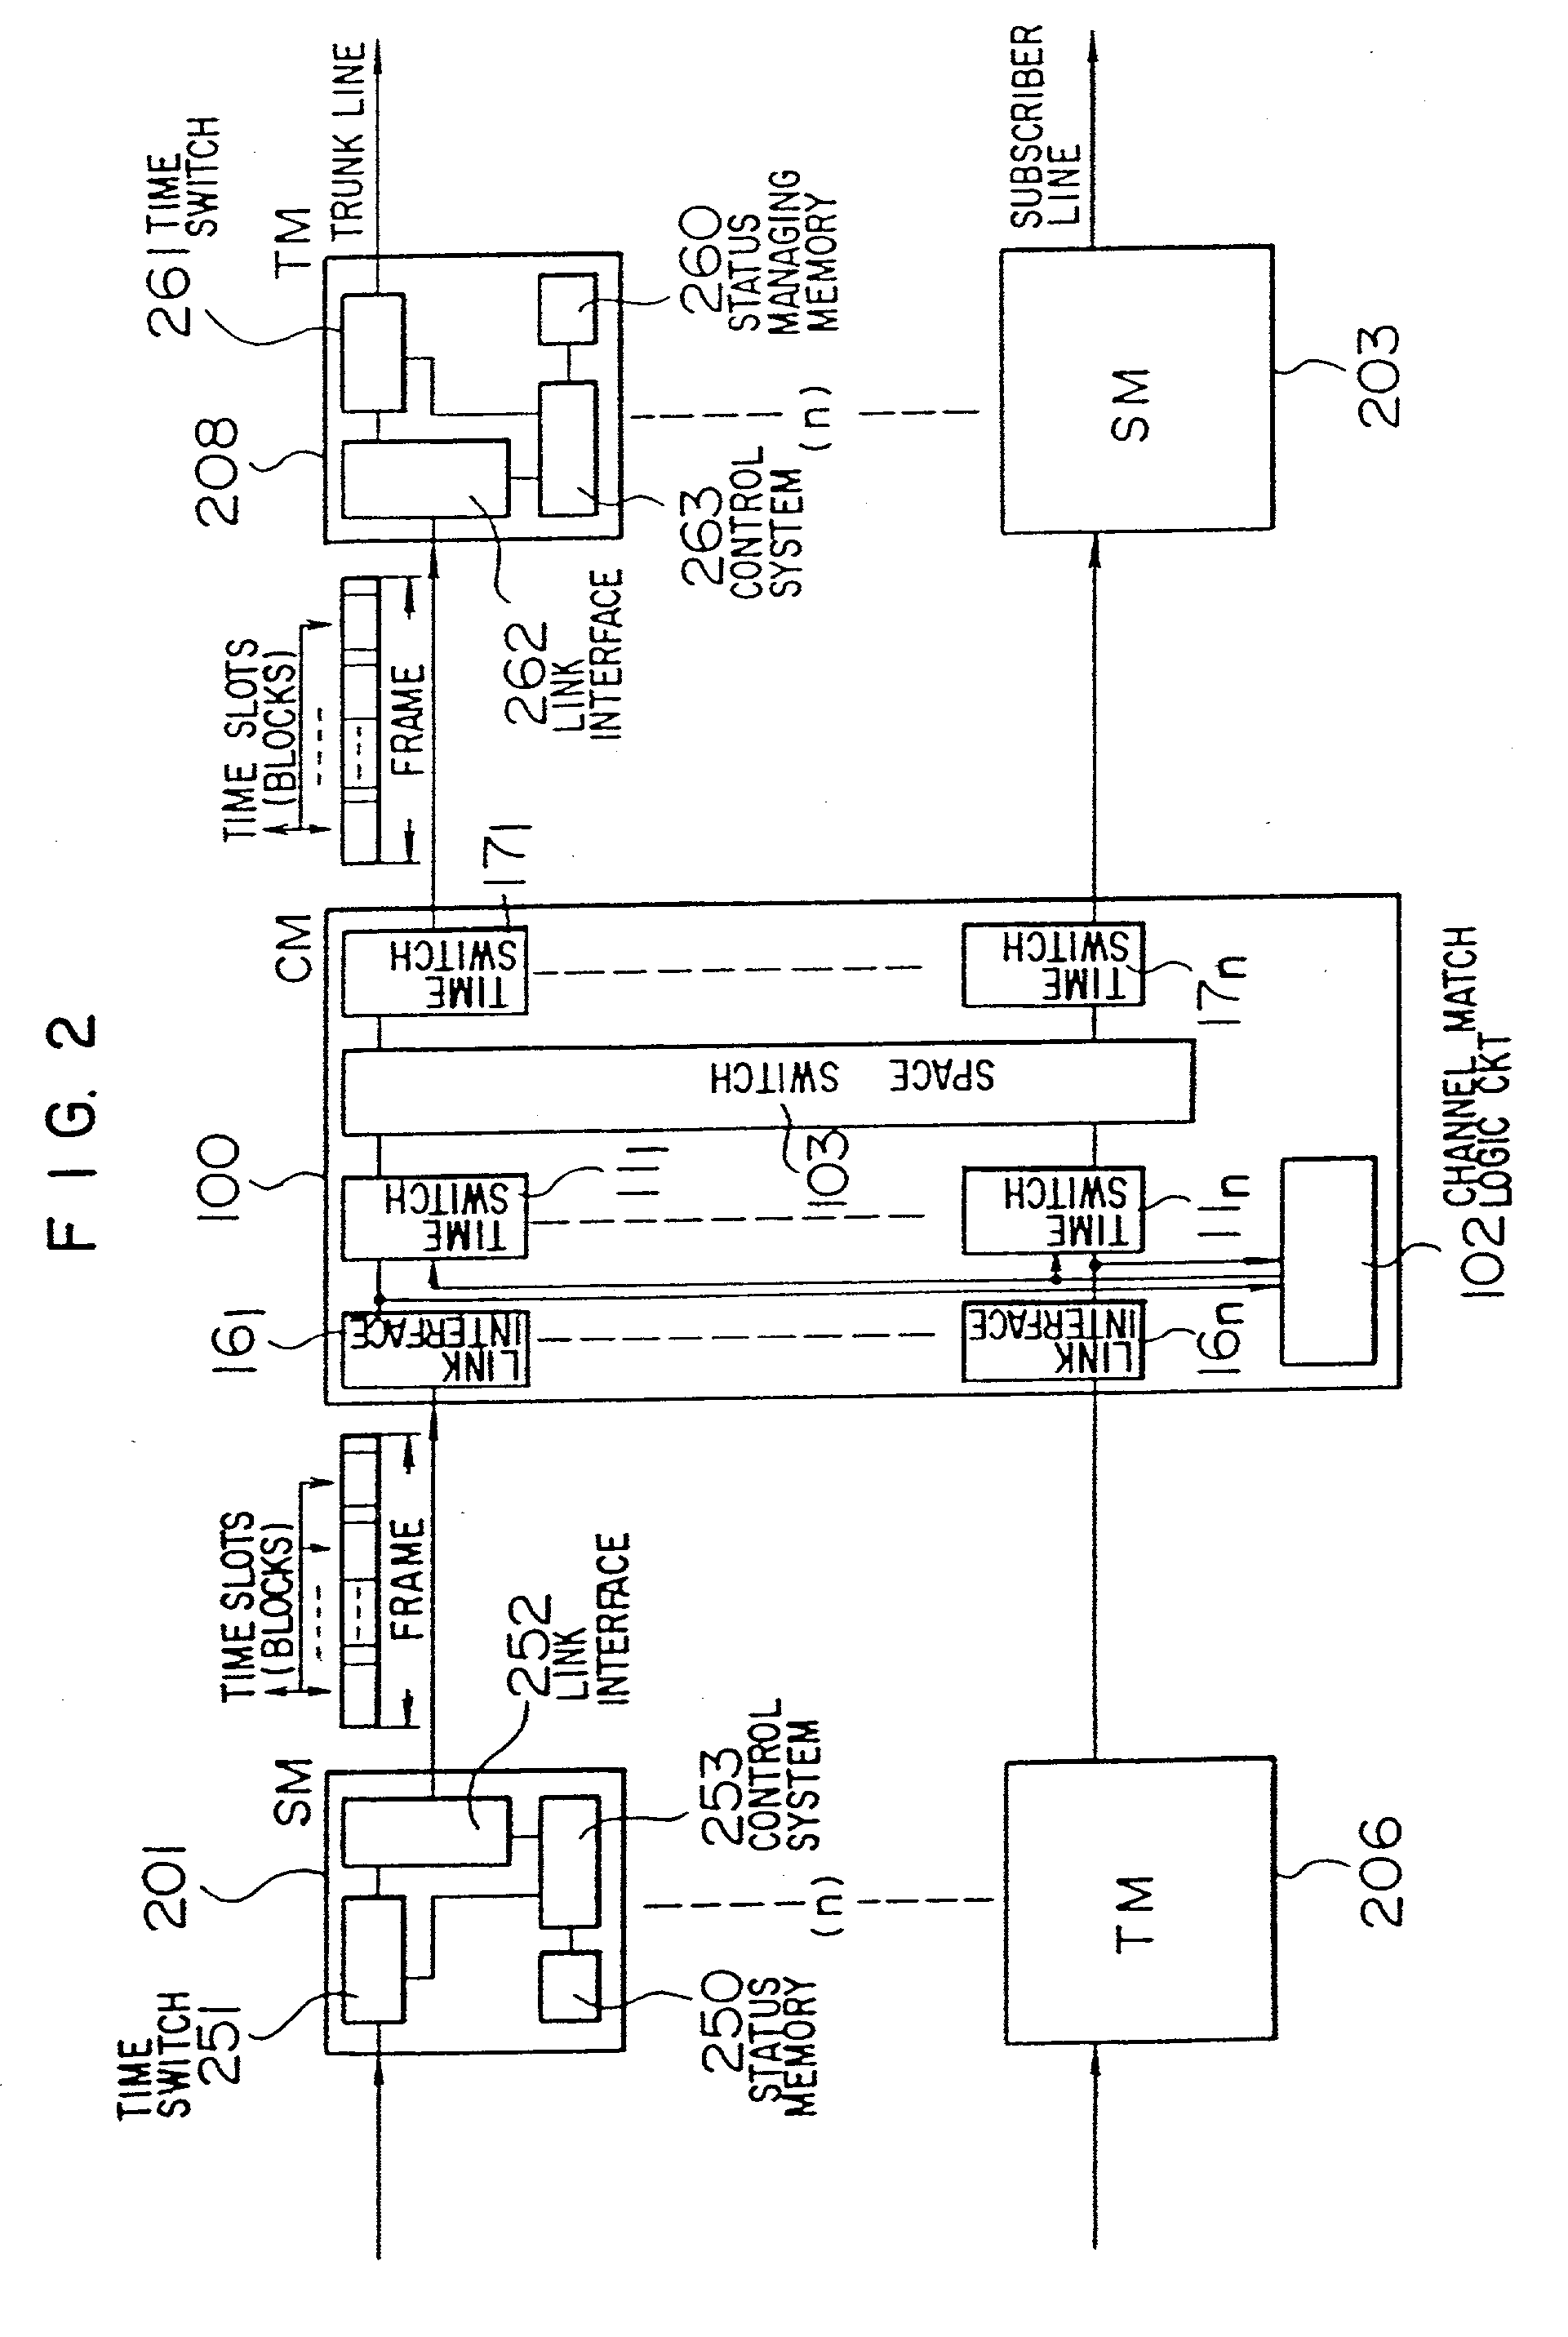 Distributed type switching system